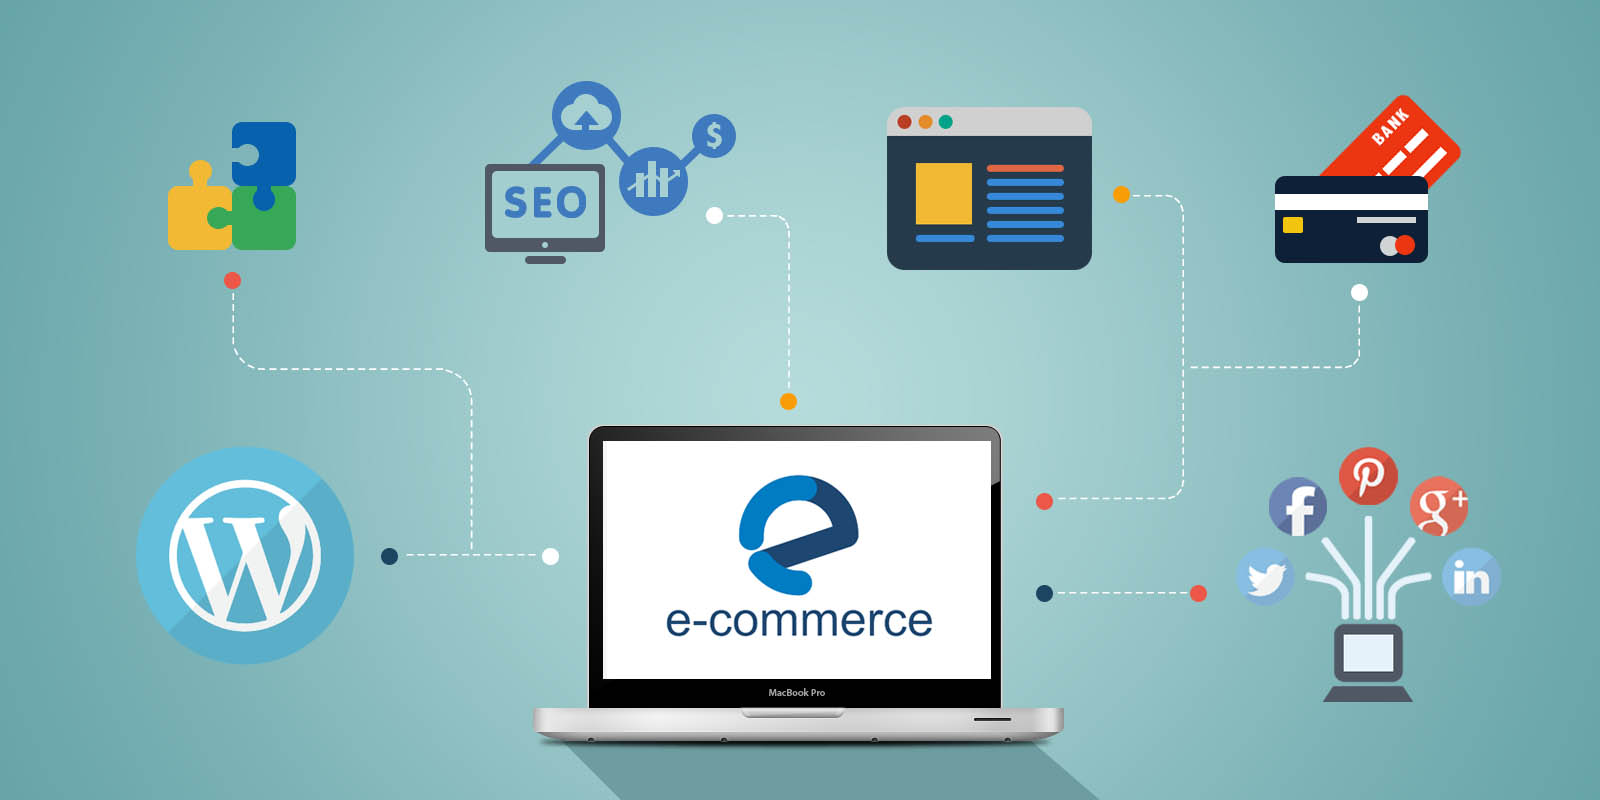 Types and features of e-commerce